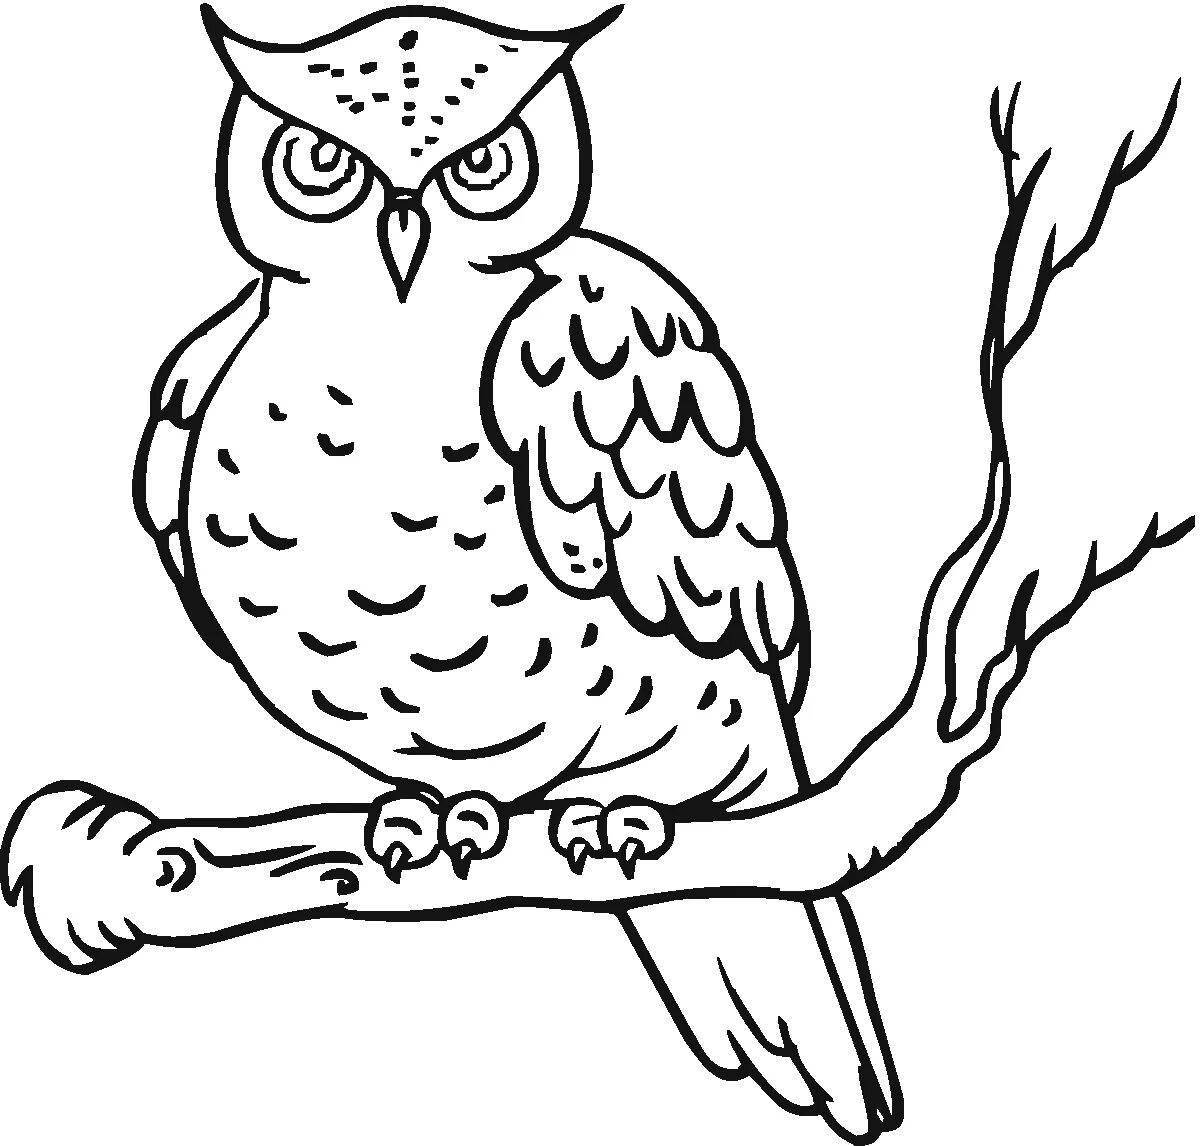 Naughty owl coloring page